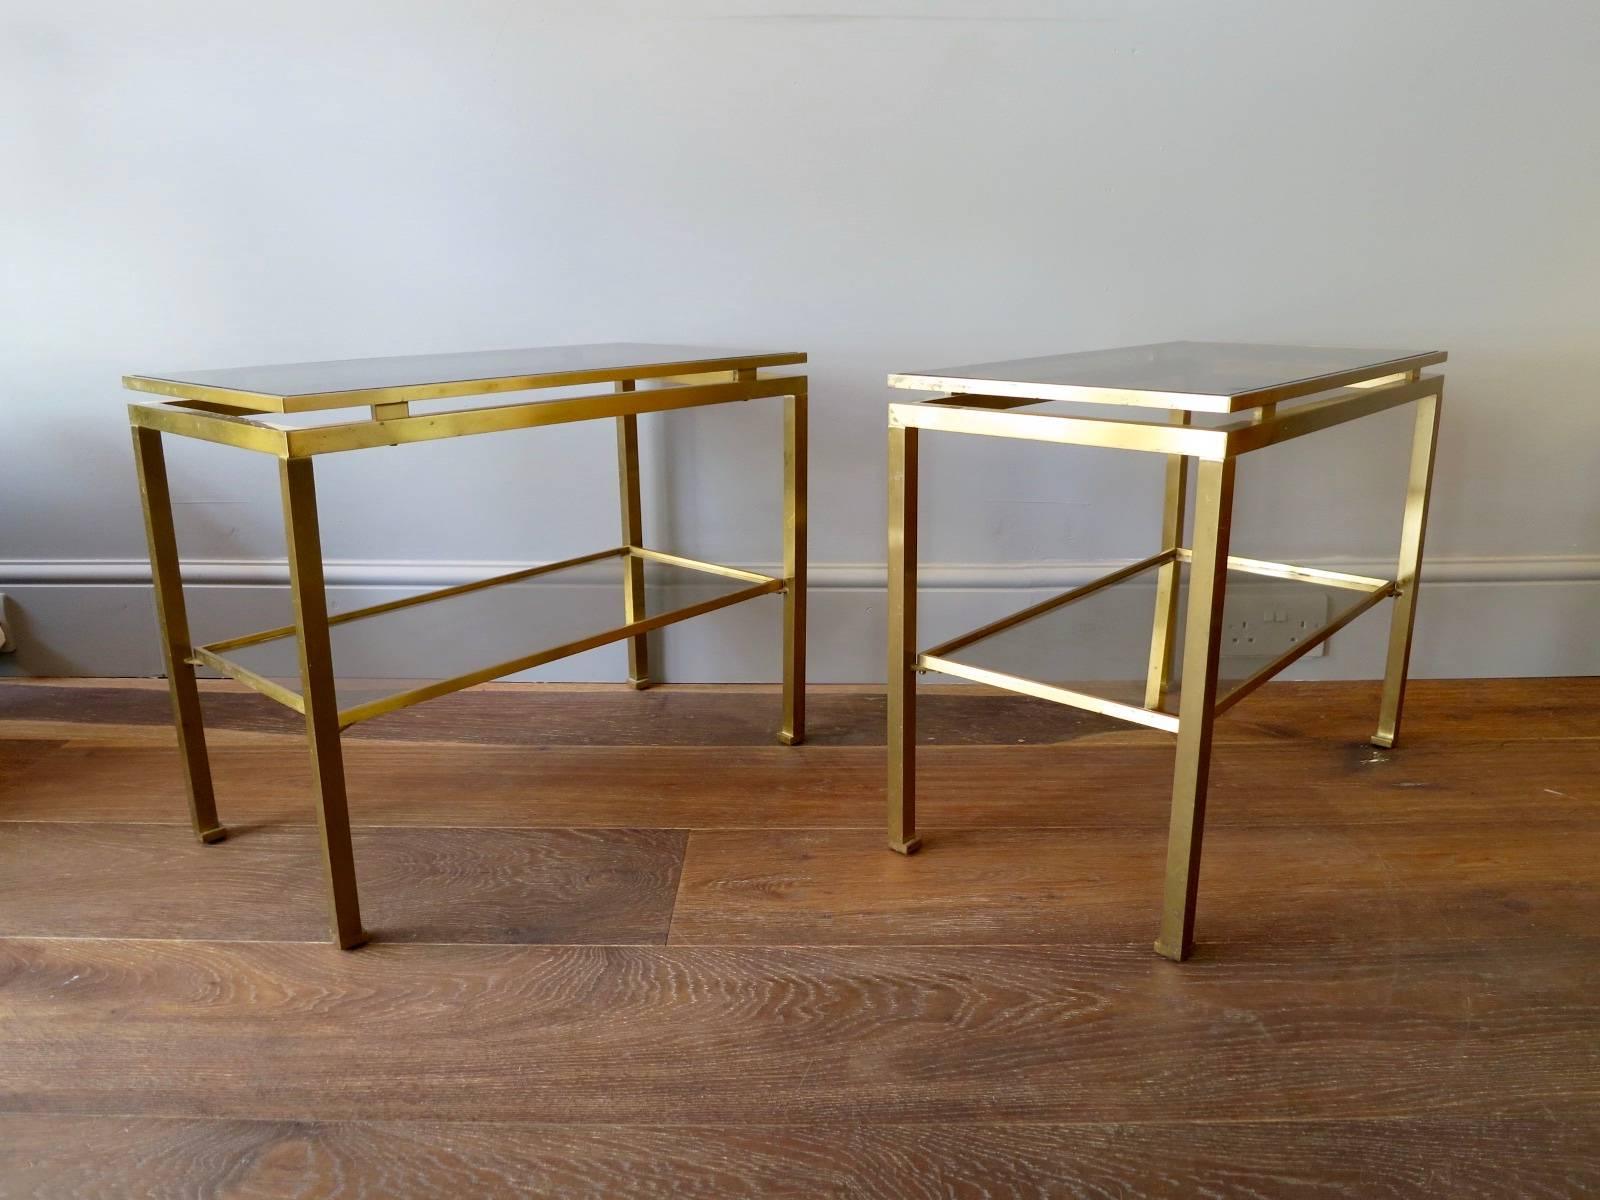 A pair of lacquered brass two tiered side tables by Guy Lefevre for Iconic design house Maison Jansen. The glass tops slightly tinted, the brass with some authentic patination, France.